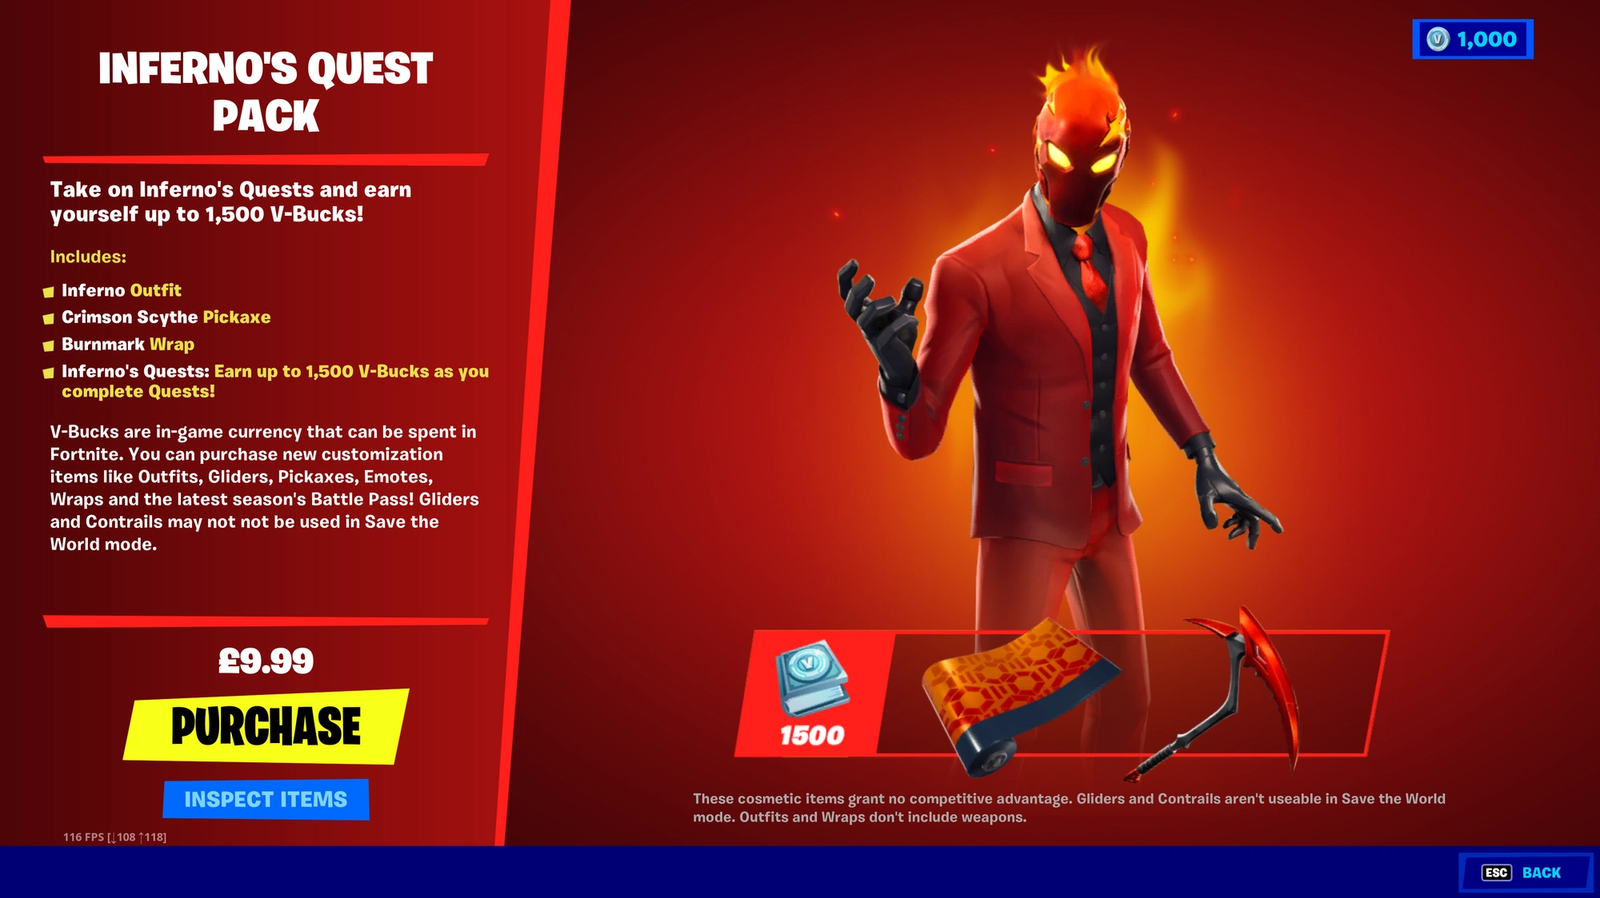 What is the price of Inferno's Quest Pack in Fortnite